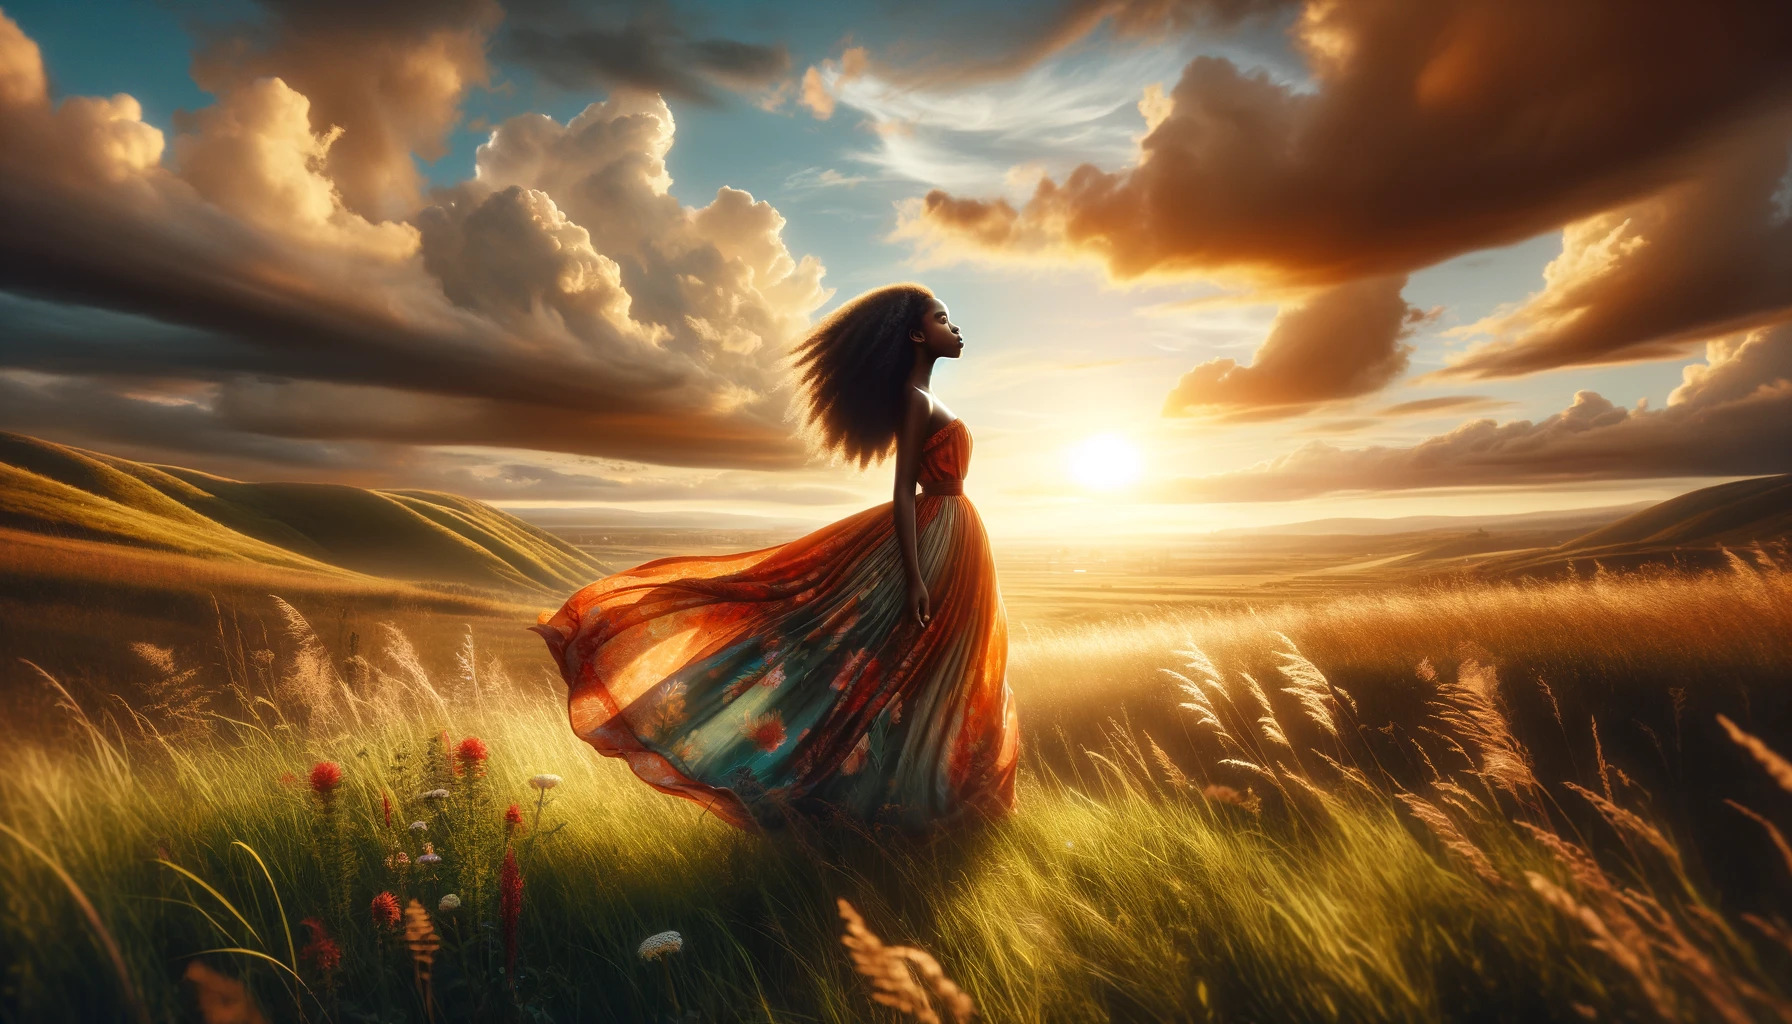 the cinematic image inspired by the concept of a young Black girl in a serene and uplifting setting. The scene captures a moment of joy and tranquility.